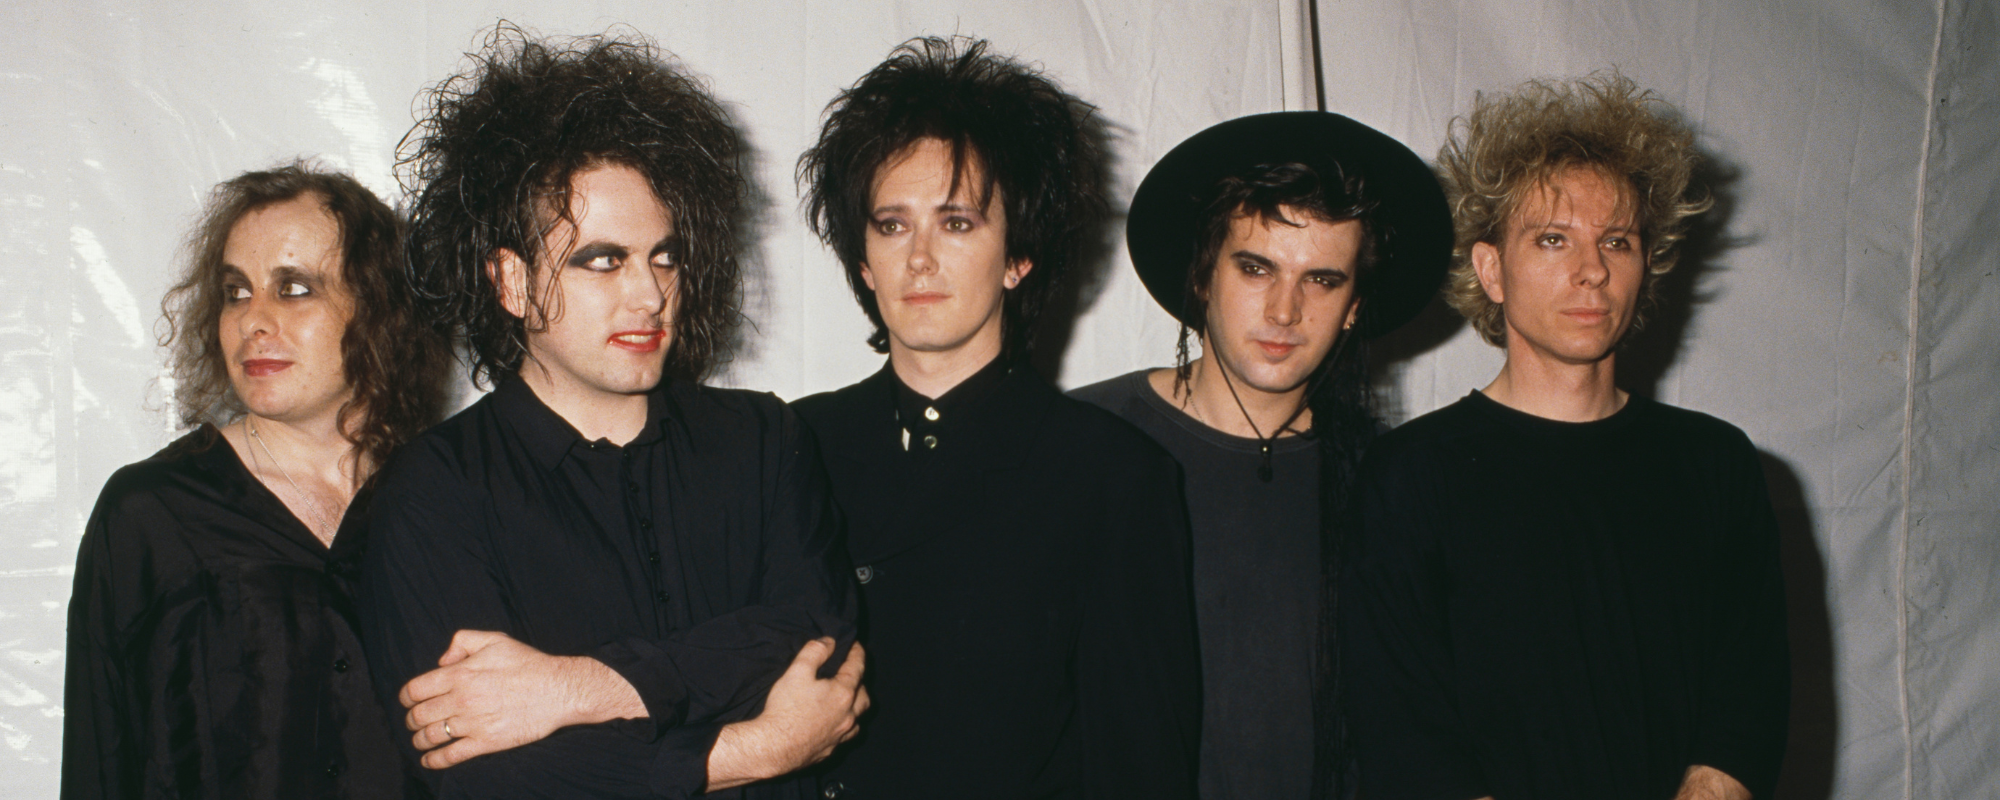 The Meaning Behind a Straight-Up Perfect Song: “Just Like Heaven” by The Cure